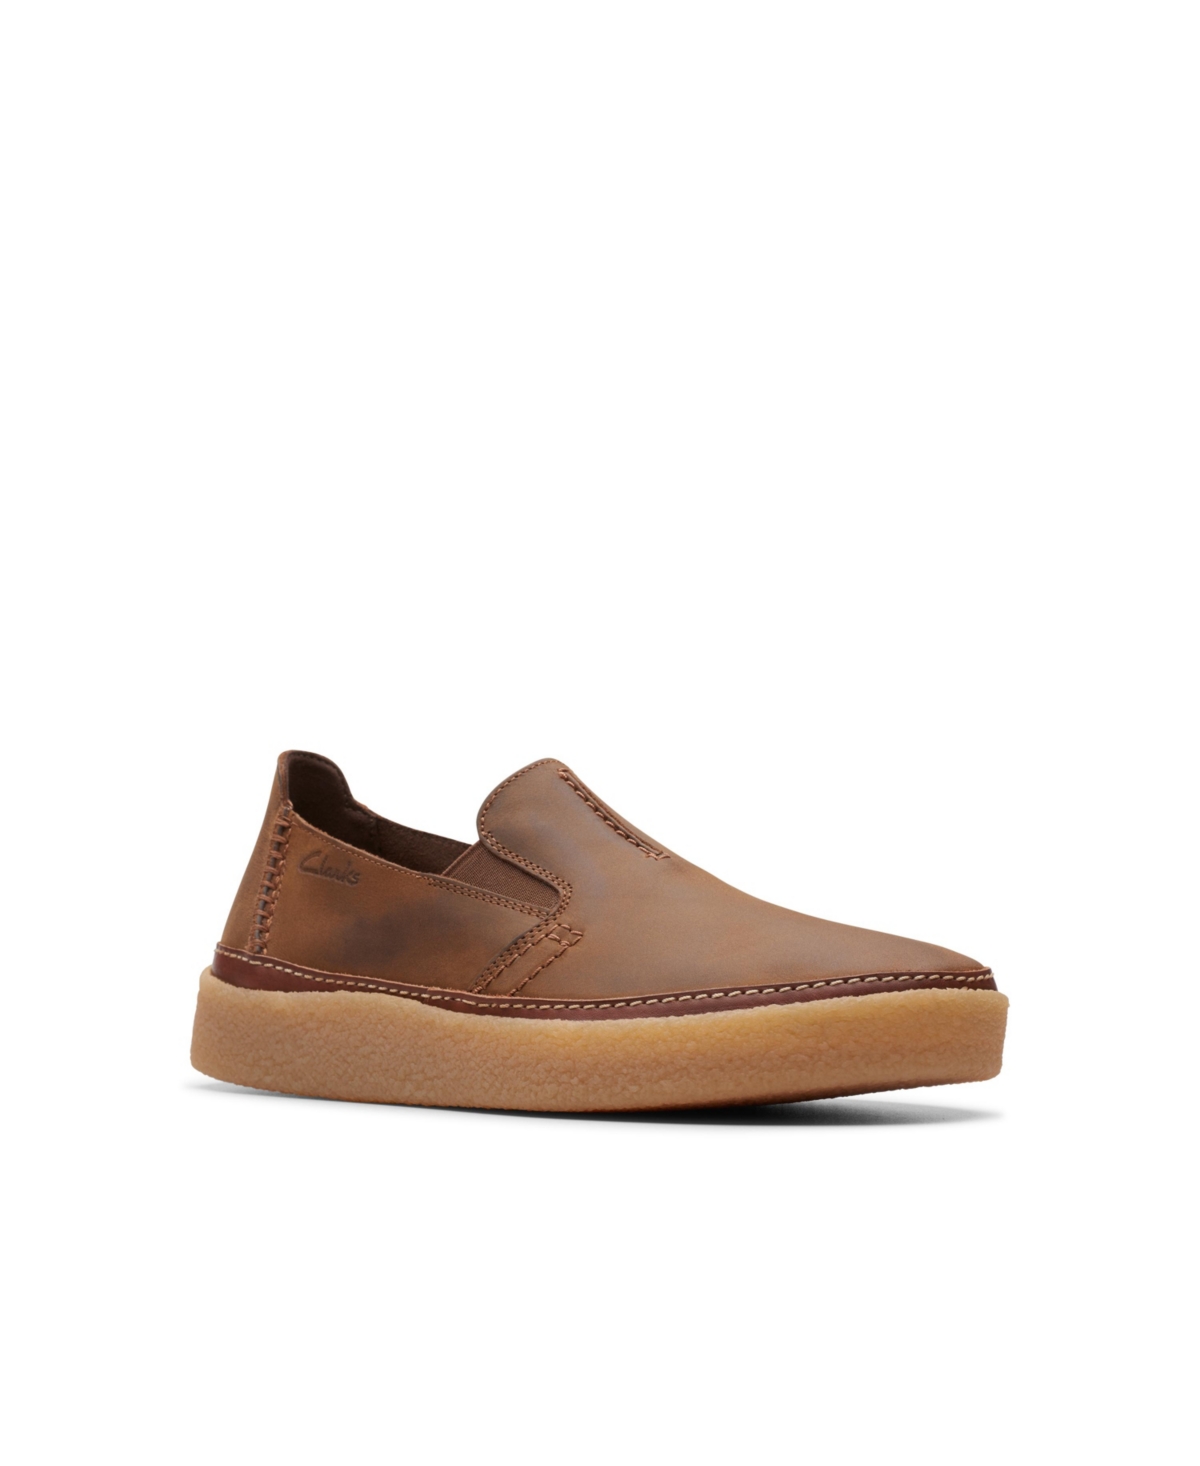 Men's Collection Oakpark Step Slip On Shoes - Beeswax Leather